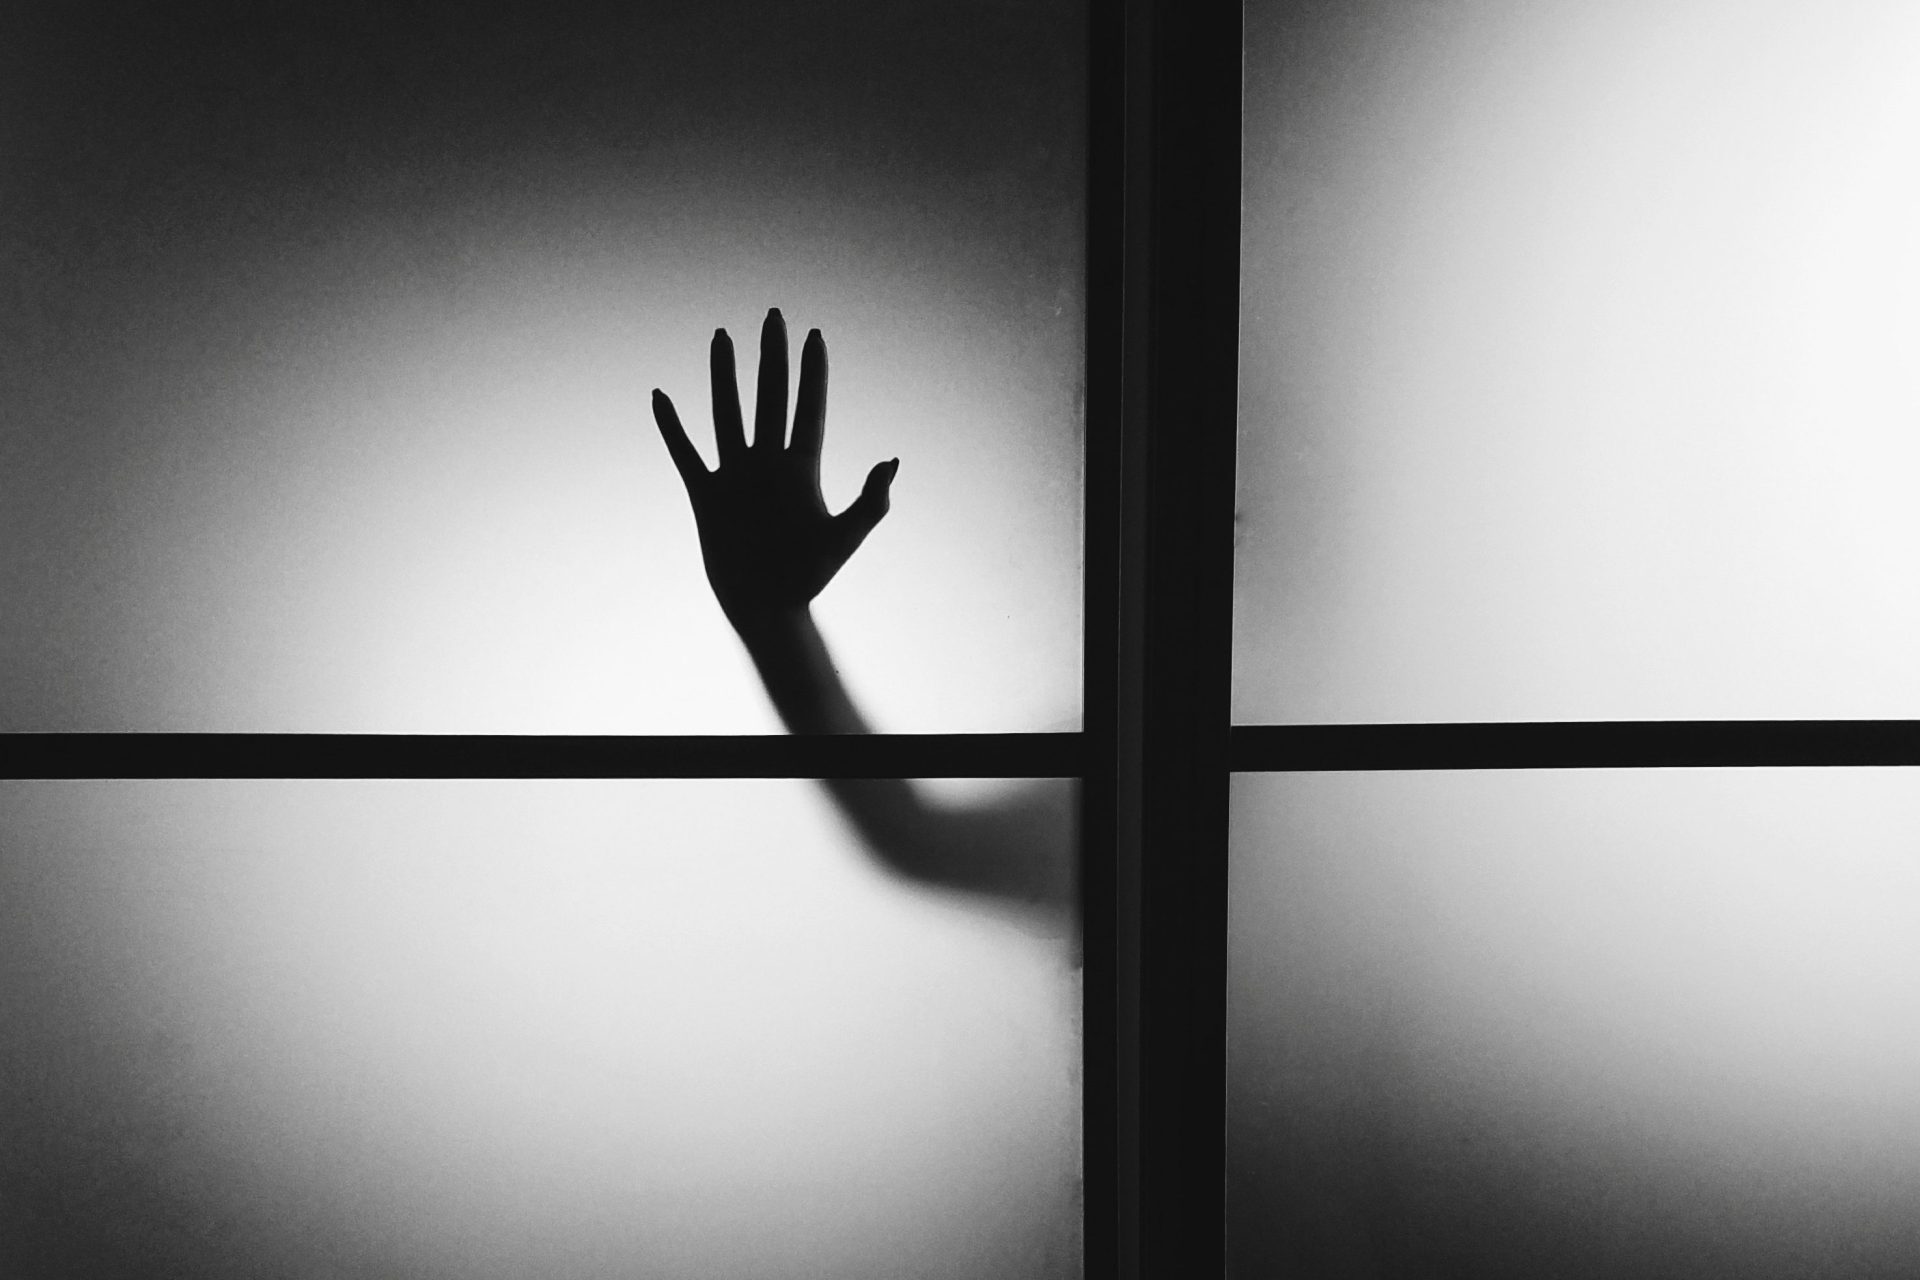 35 Victims On The Creepiest, Gut-Twisting Thing They Have Seen Through Their Window